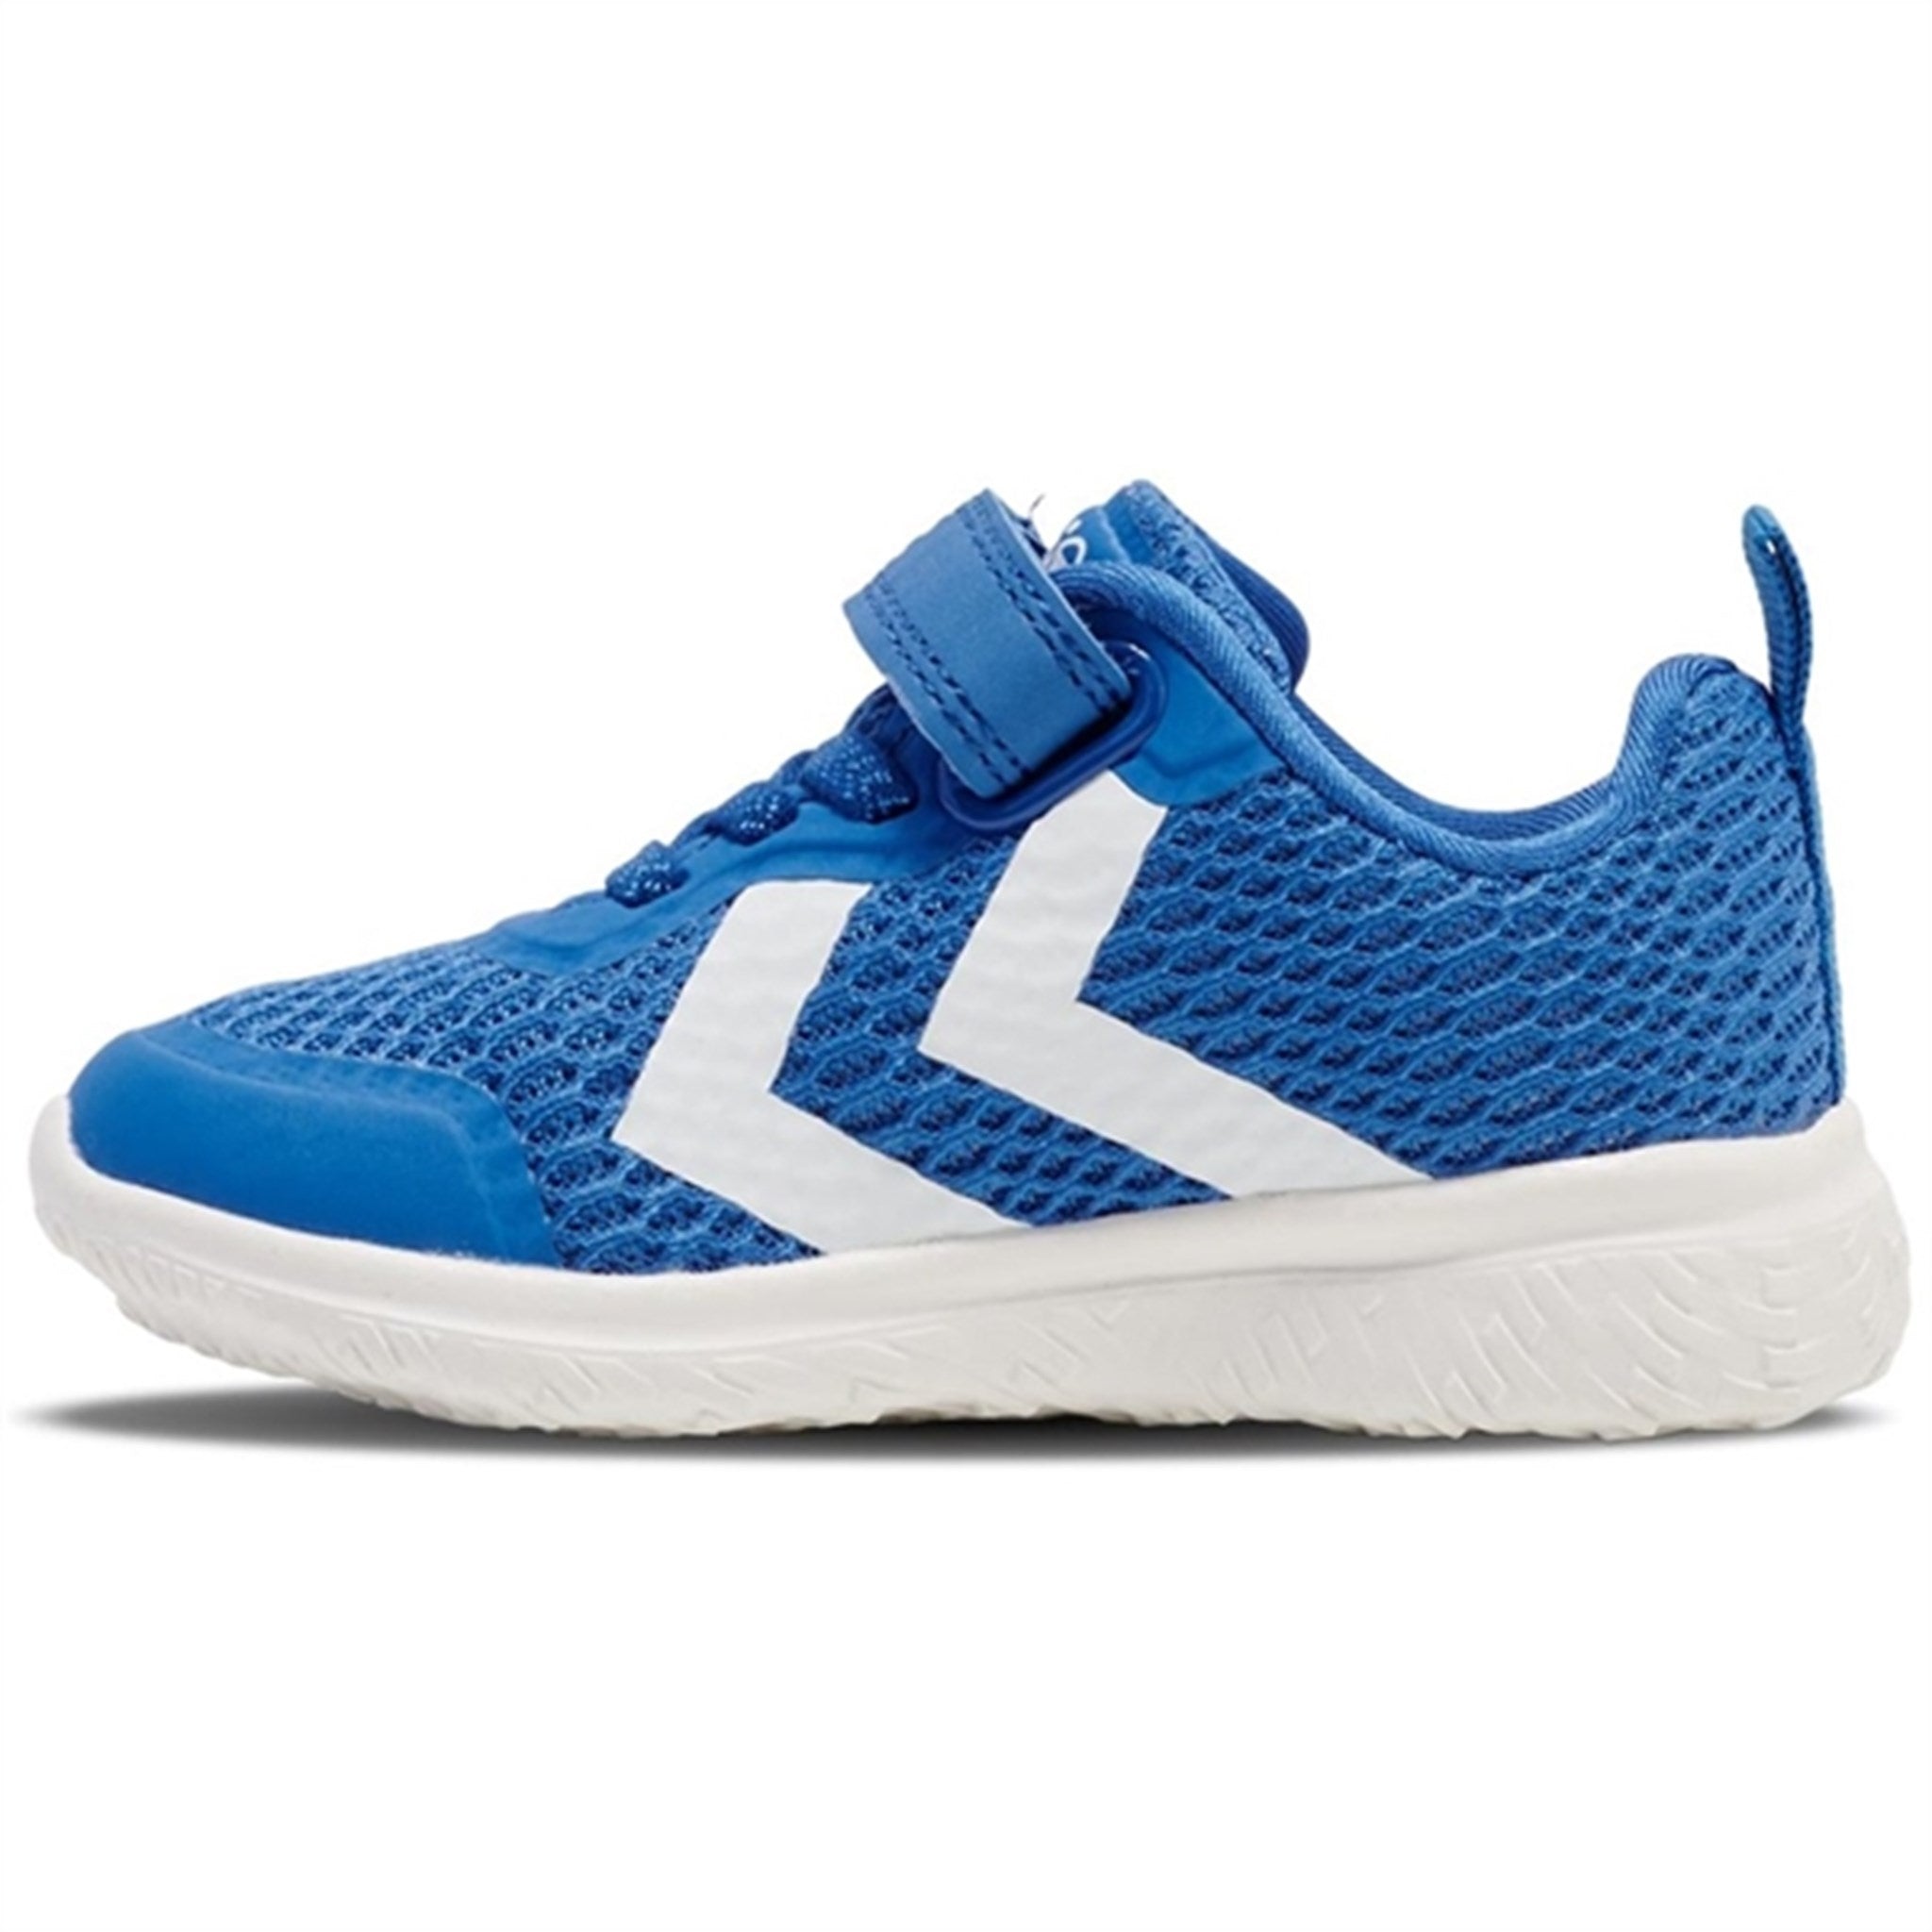 Hummel Blue/White Actus Recycled Infant Sneakers Blue/White 6